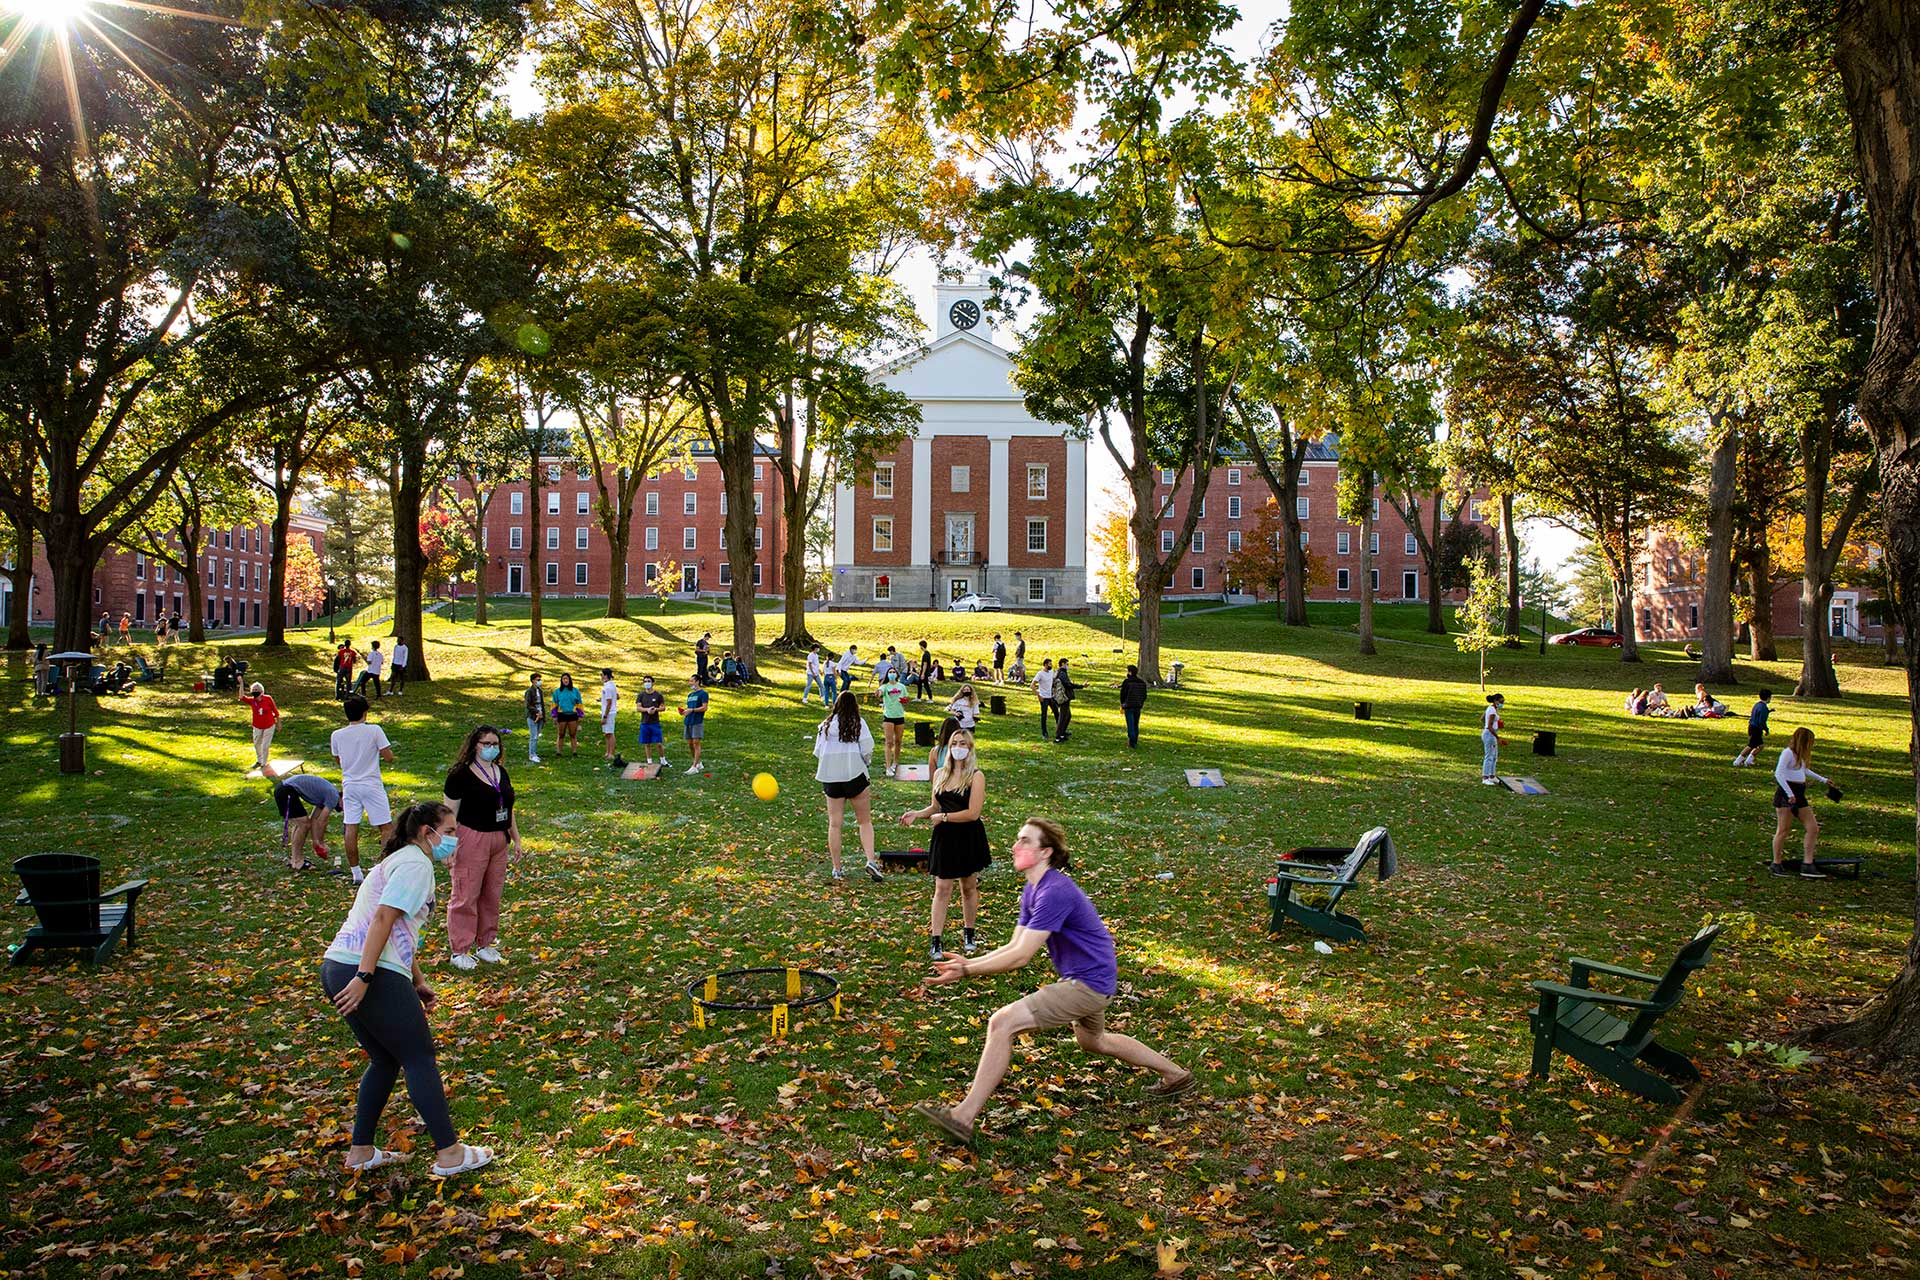 Students enjoying outdoor activities on the main quad of amherst college